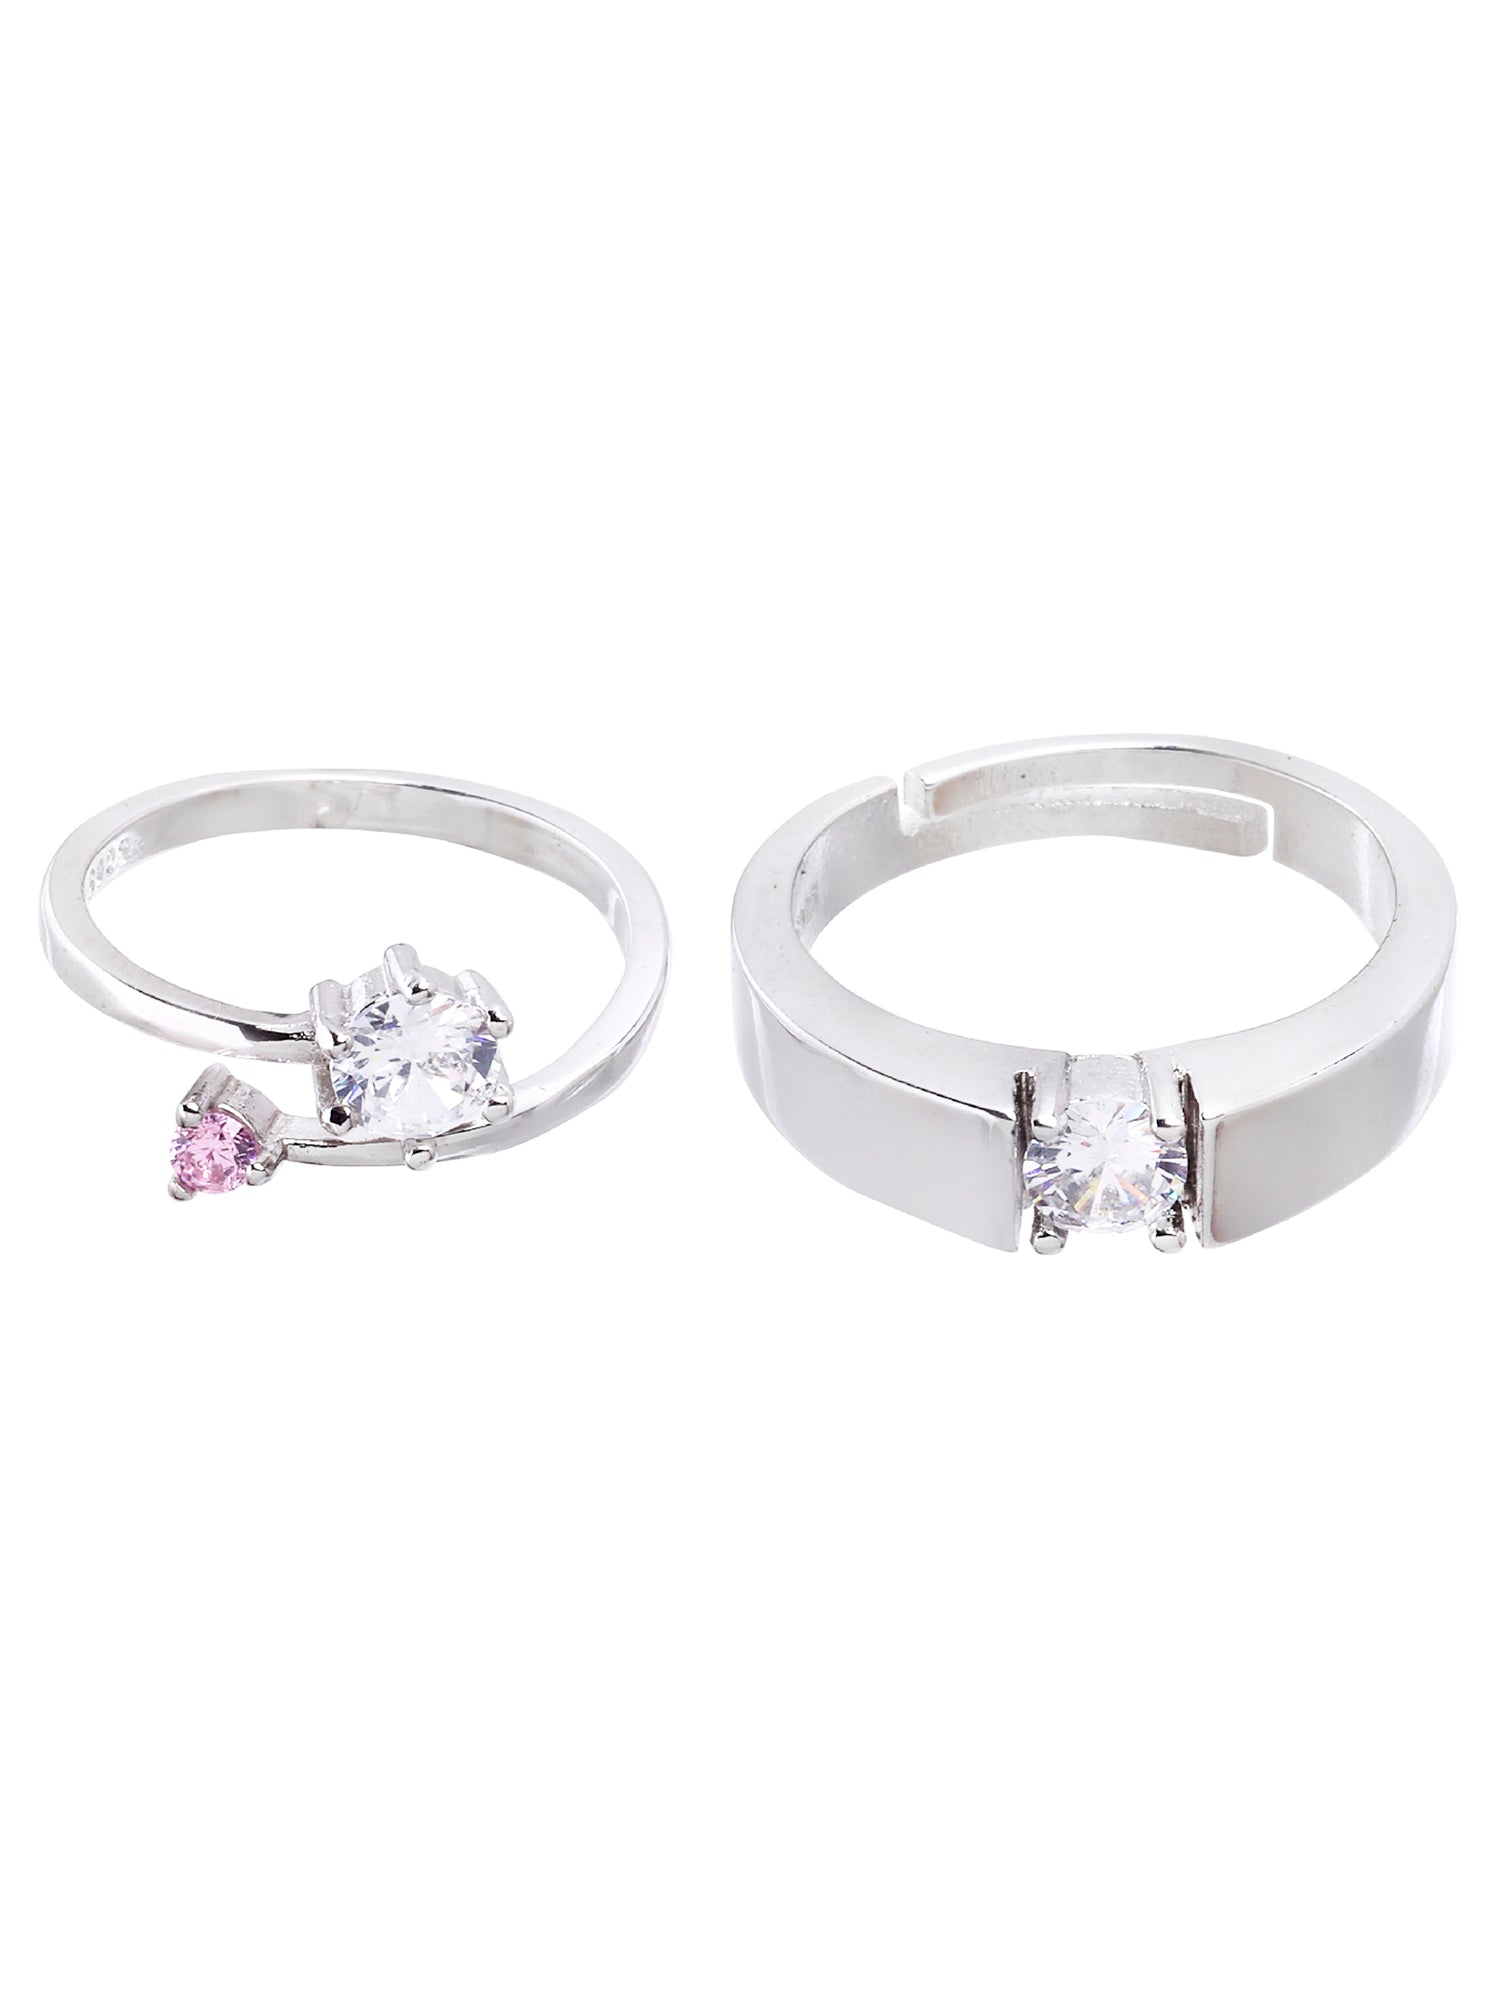 Platinum Plated Elegant Couple Adjustable Ring with Pink Stone